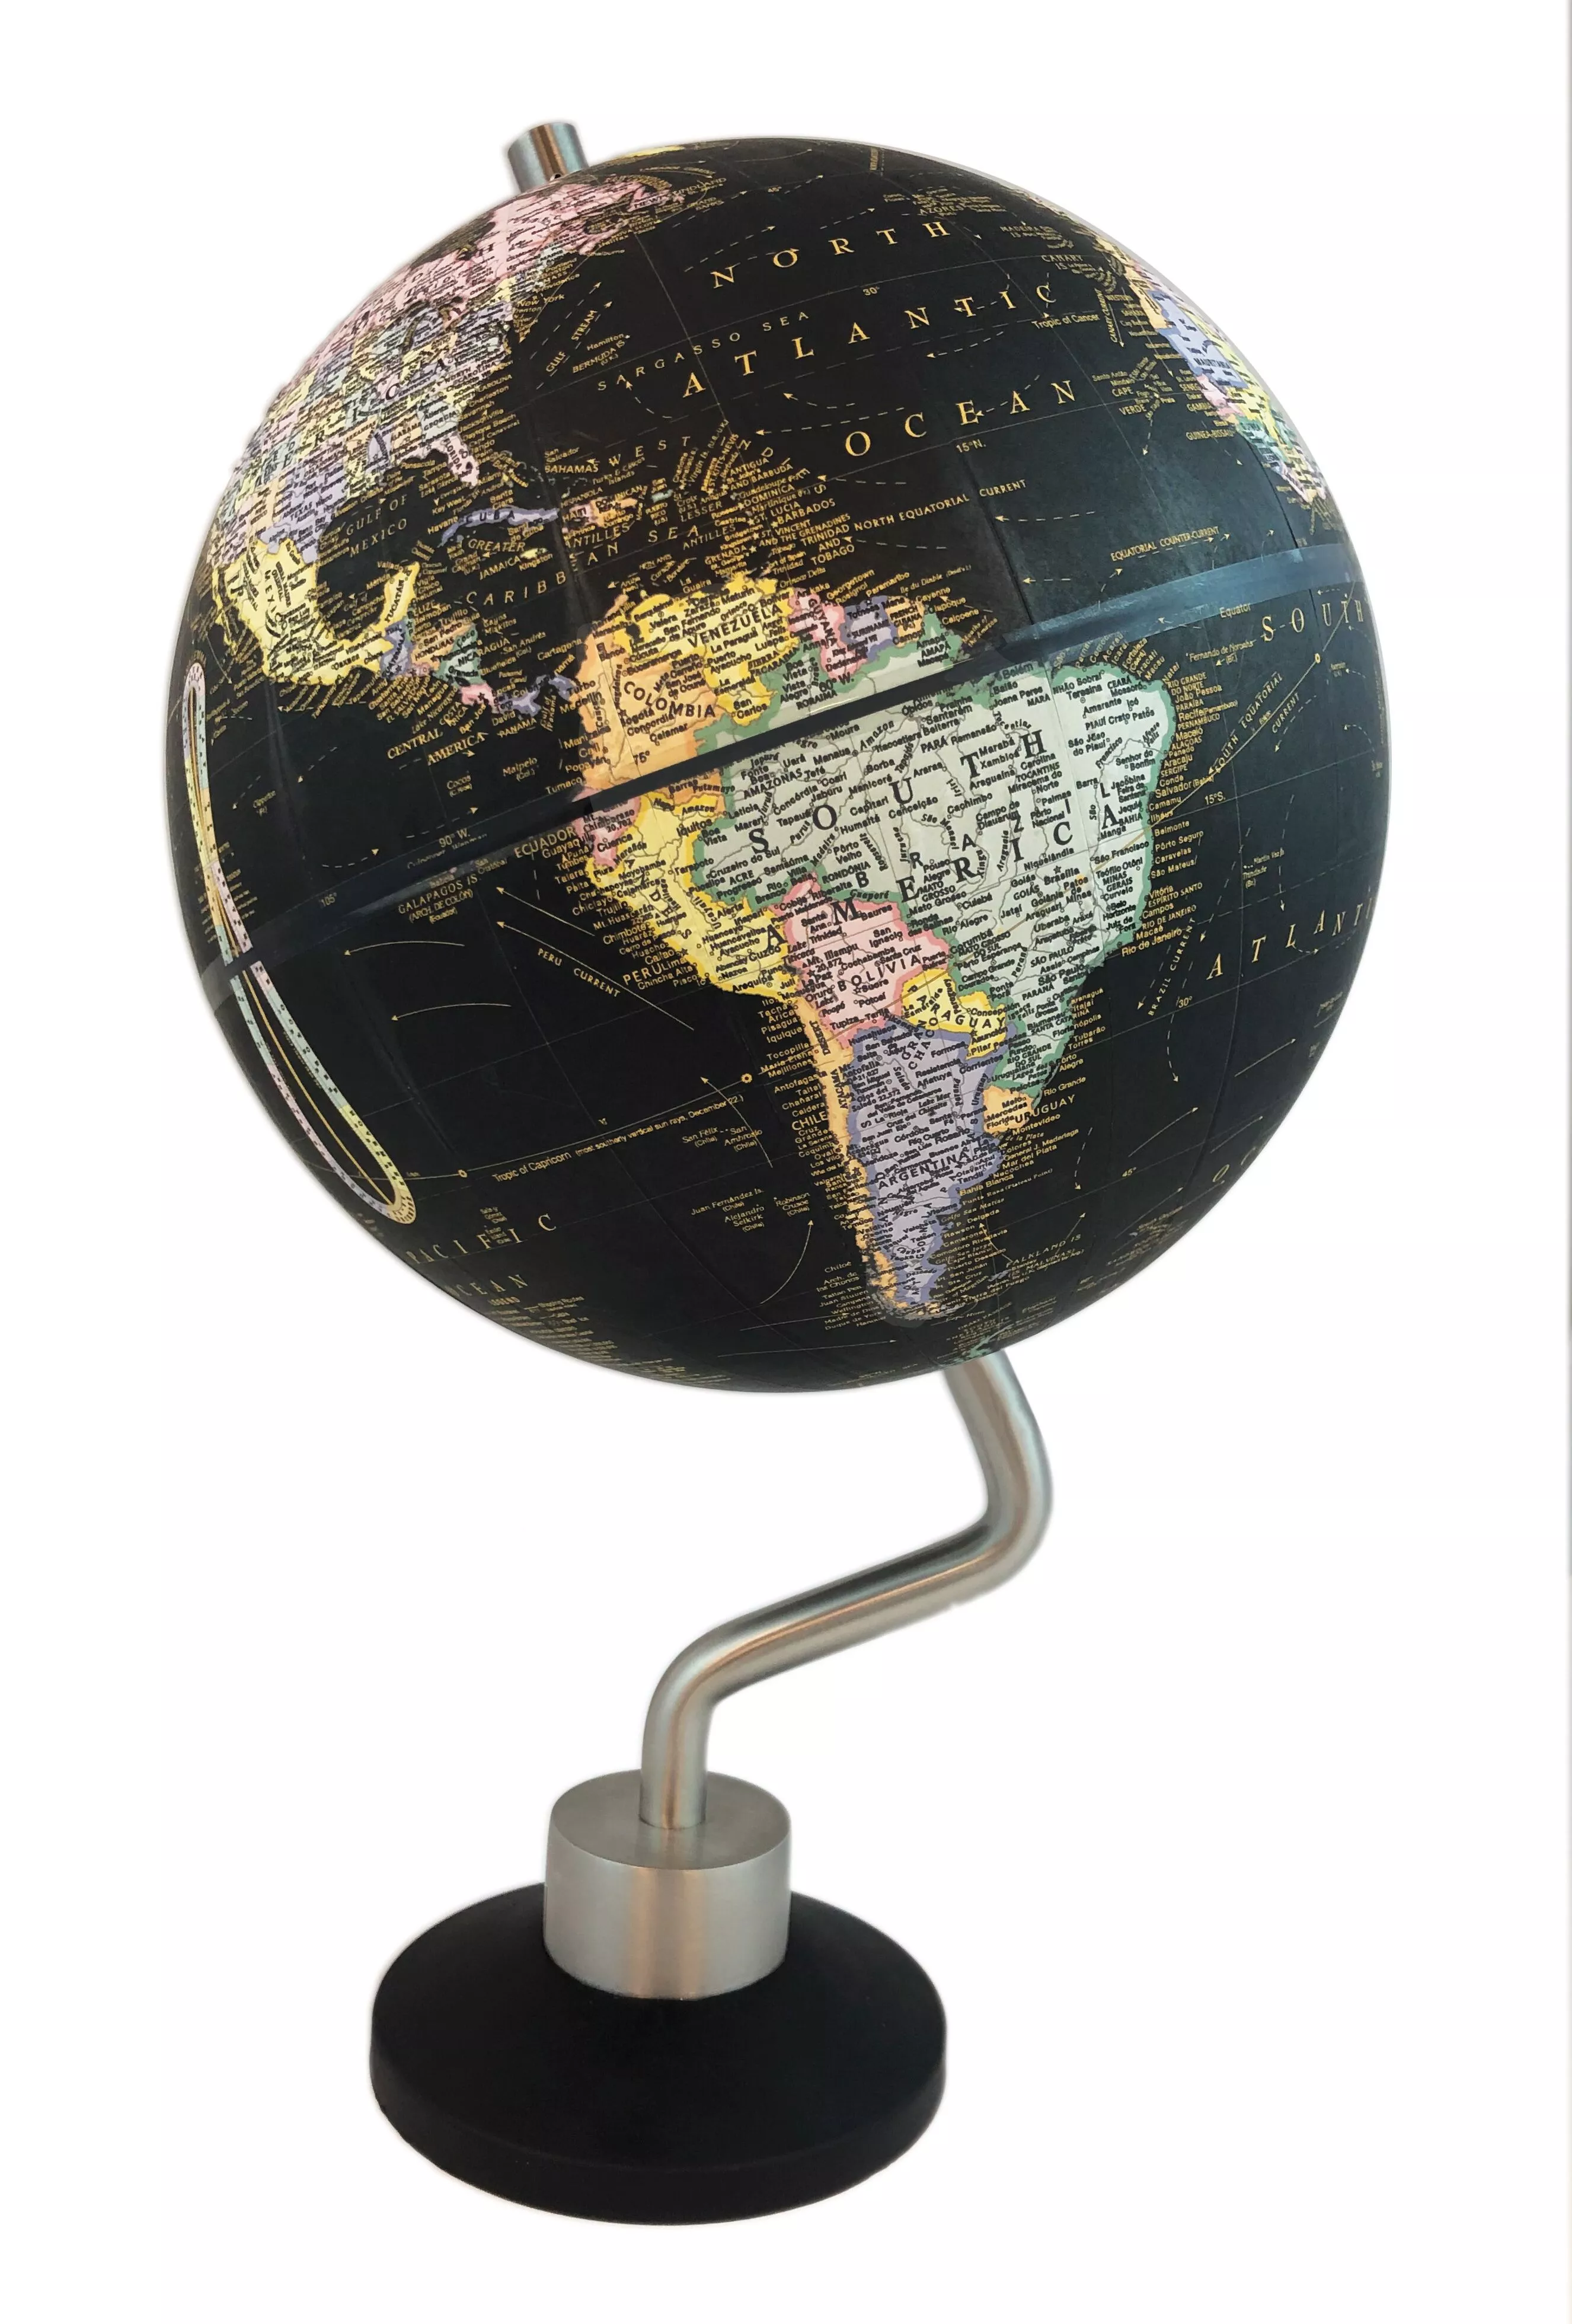 inch　Online　globe　colorful　by　is　Ocean　Shop　outlines.　The　black　country　and　51567　highlighted　fill　border　ocean　Monaco　Black　9